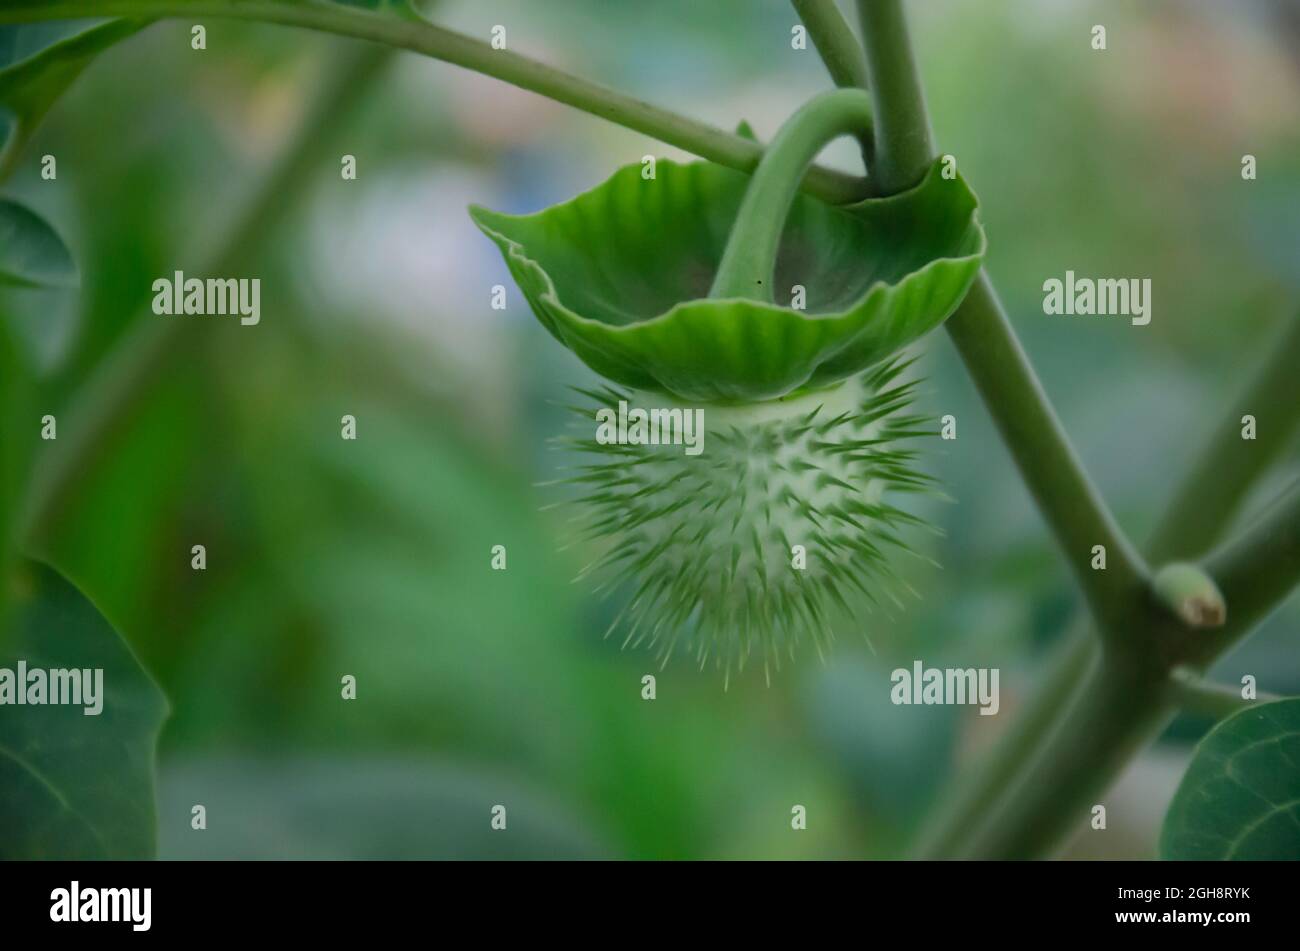 SELECTIVE FOCUS ON DHATURA INNOXIA OR ANGEL'S TRUMPET PLANT ISOLATED WITH GREEN BLUR BACKGROUND IN THE MORNING SUN LIGHT. Stock Photo